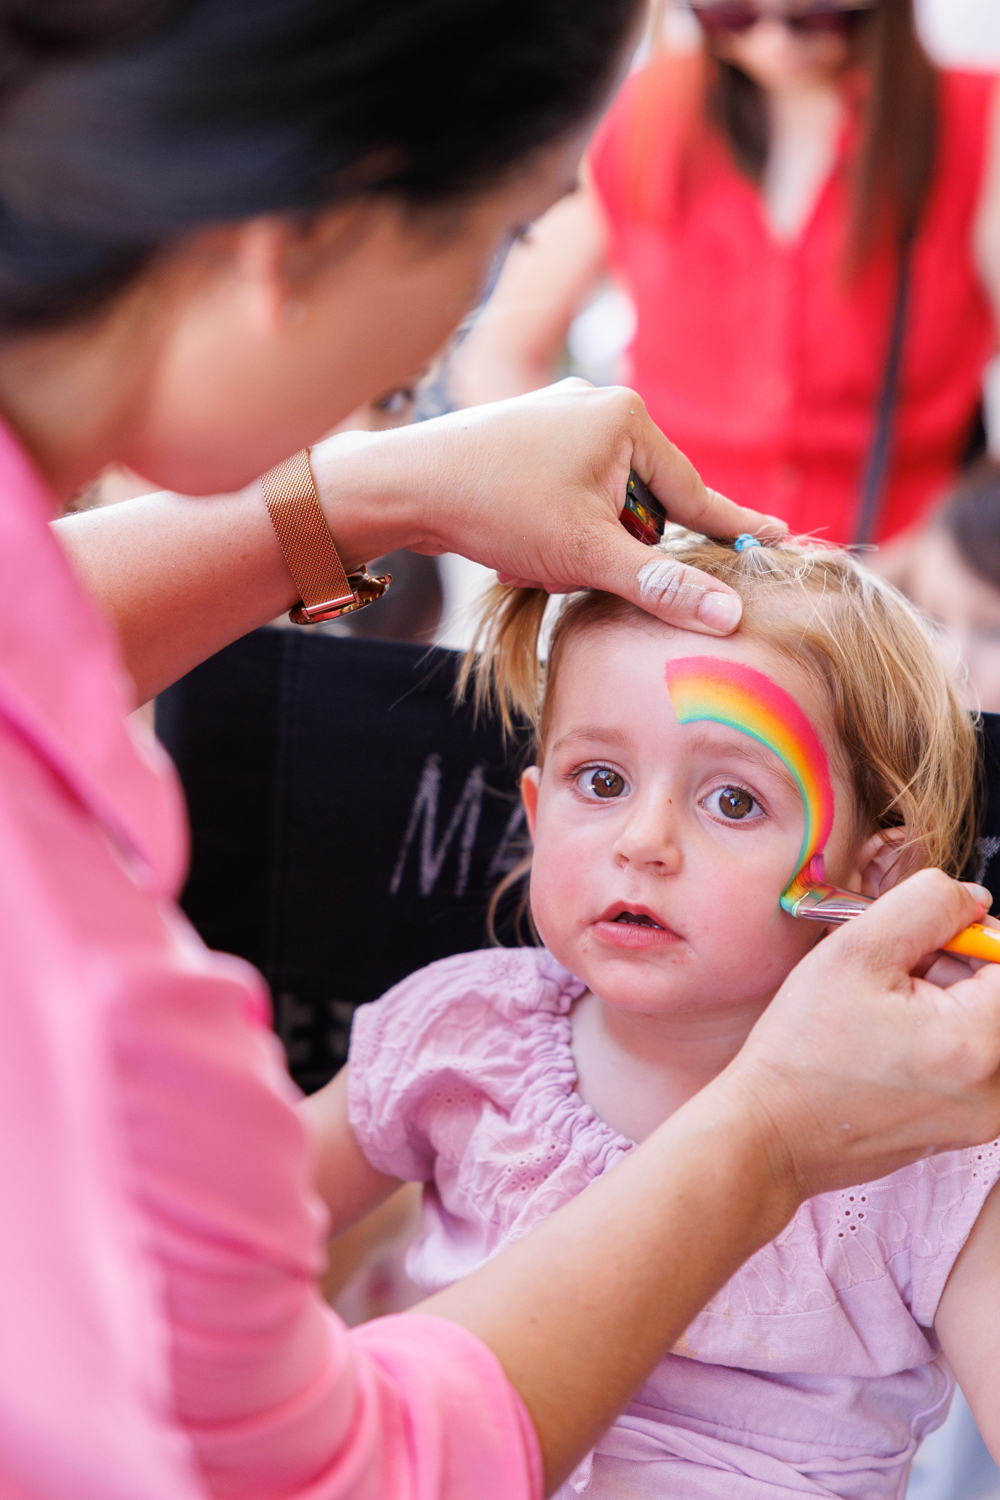 A young child getting a rainbow painted on their face.